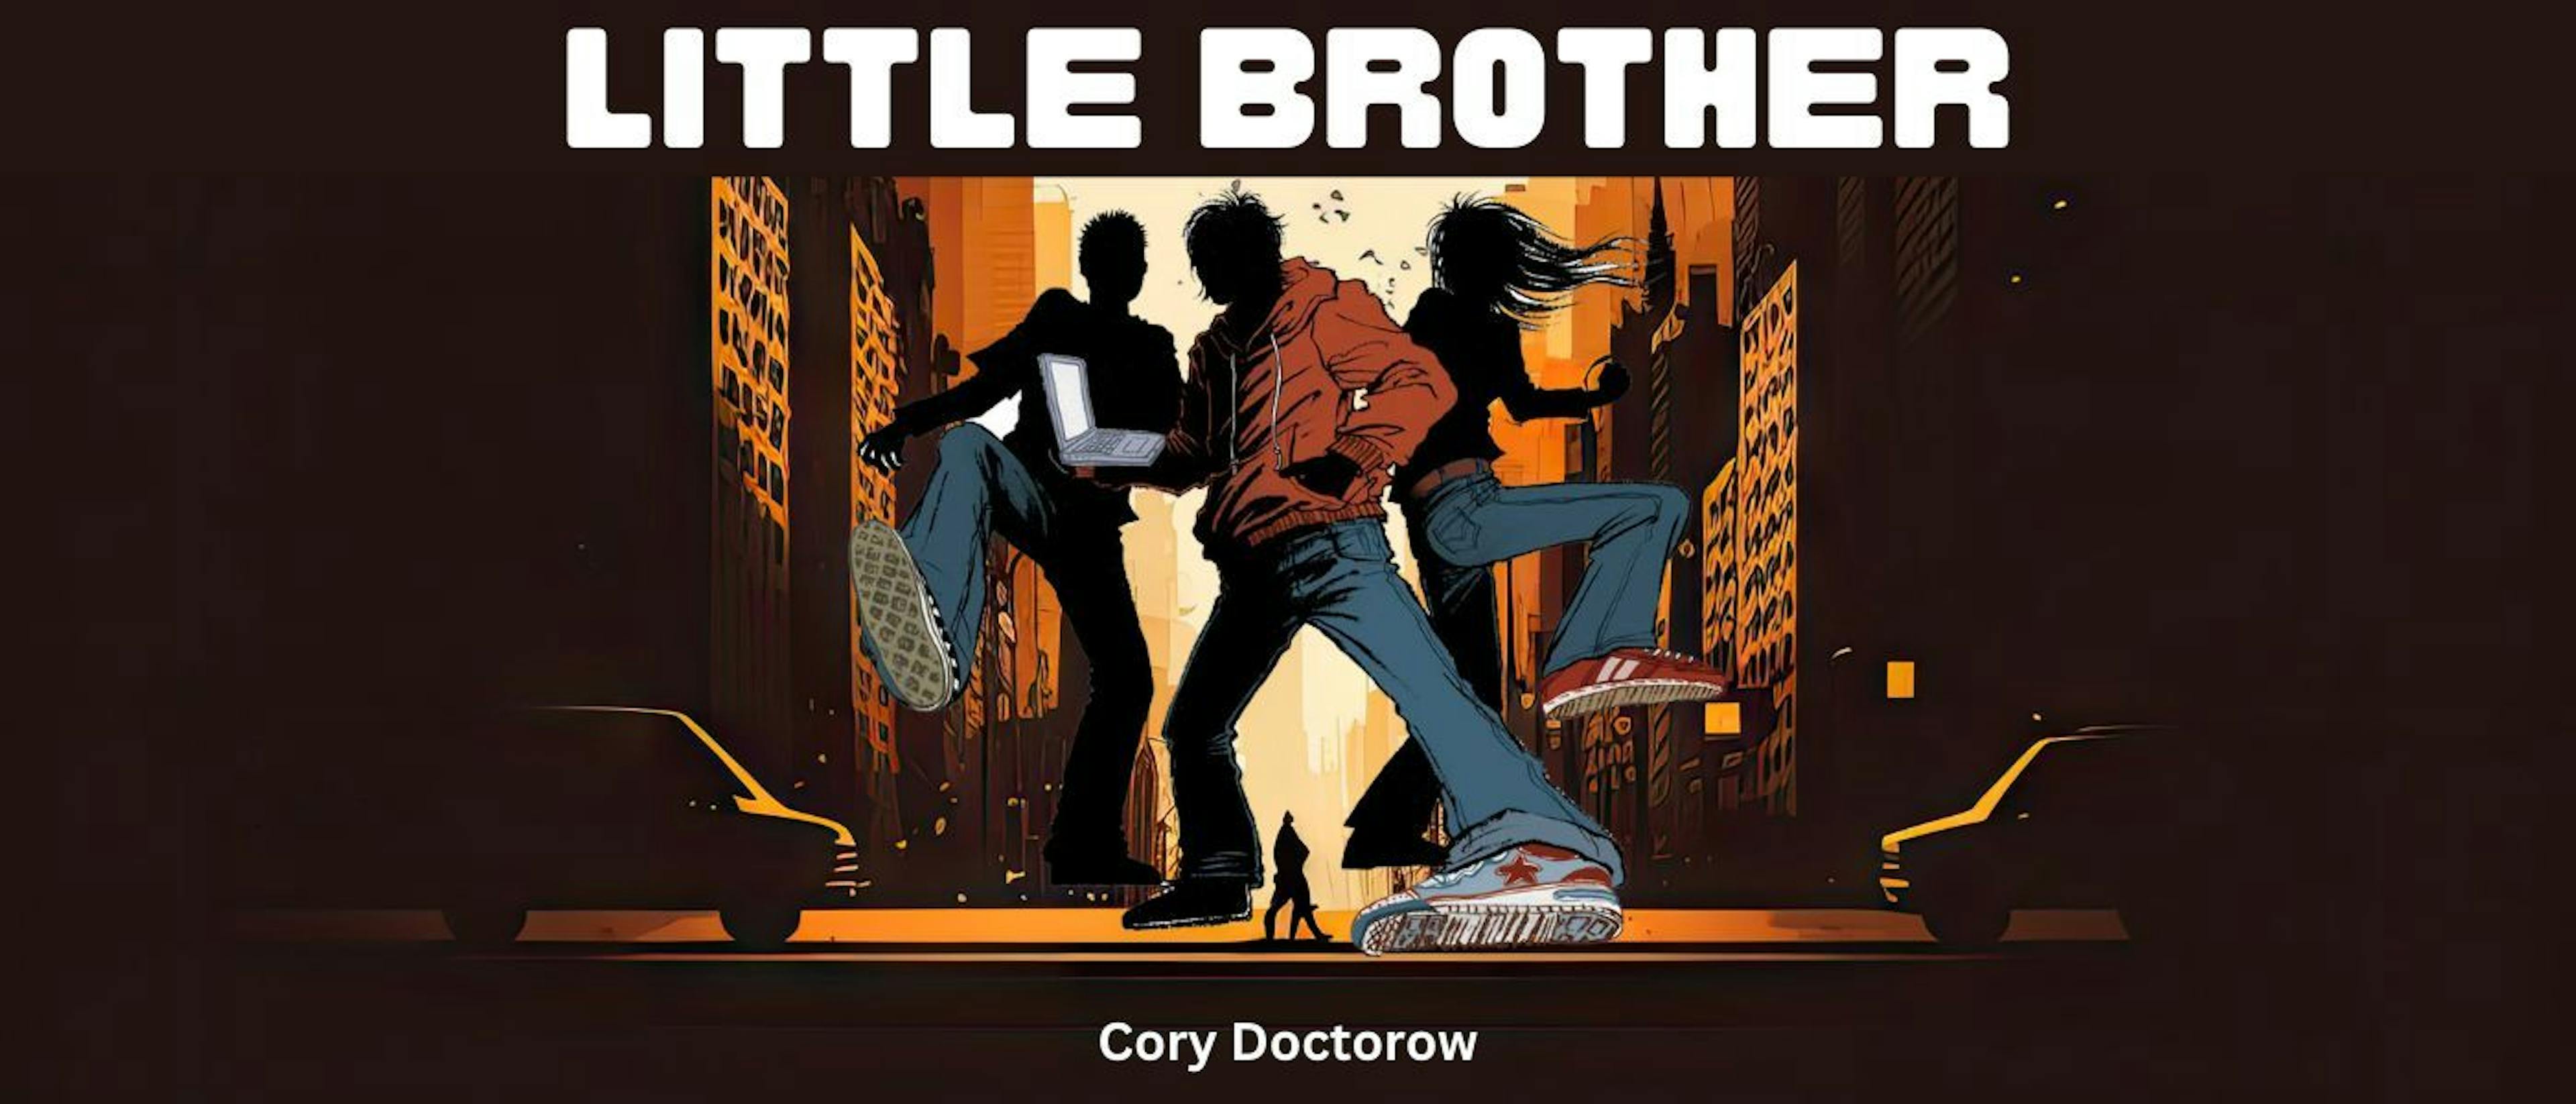 featured image - Little Brother by Cory Doctorow - Table of Links